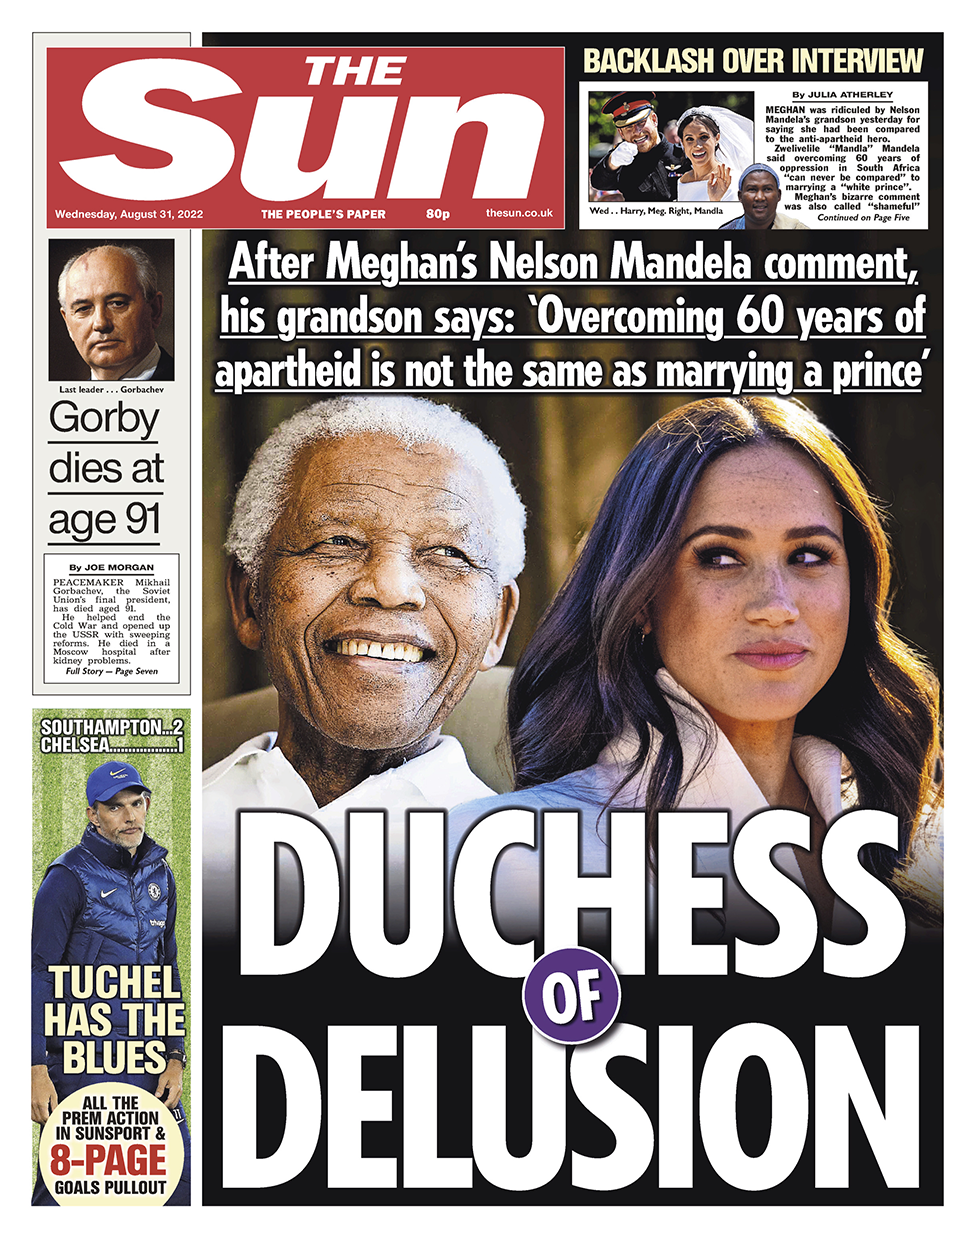 The headline in the Sun reads 'Duchess of delusion'